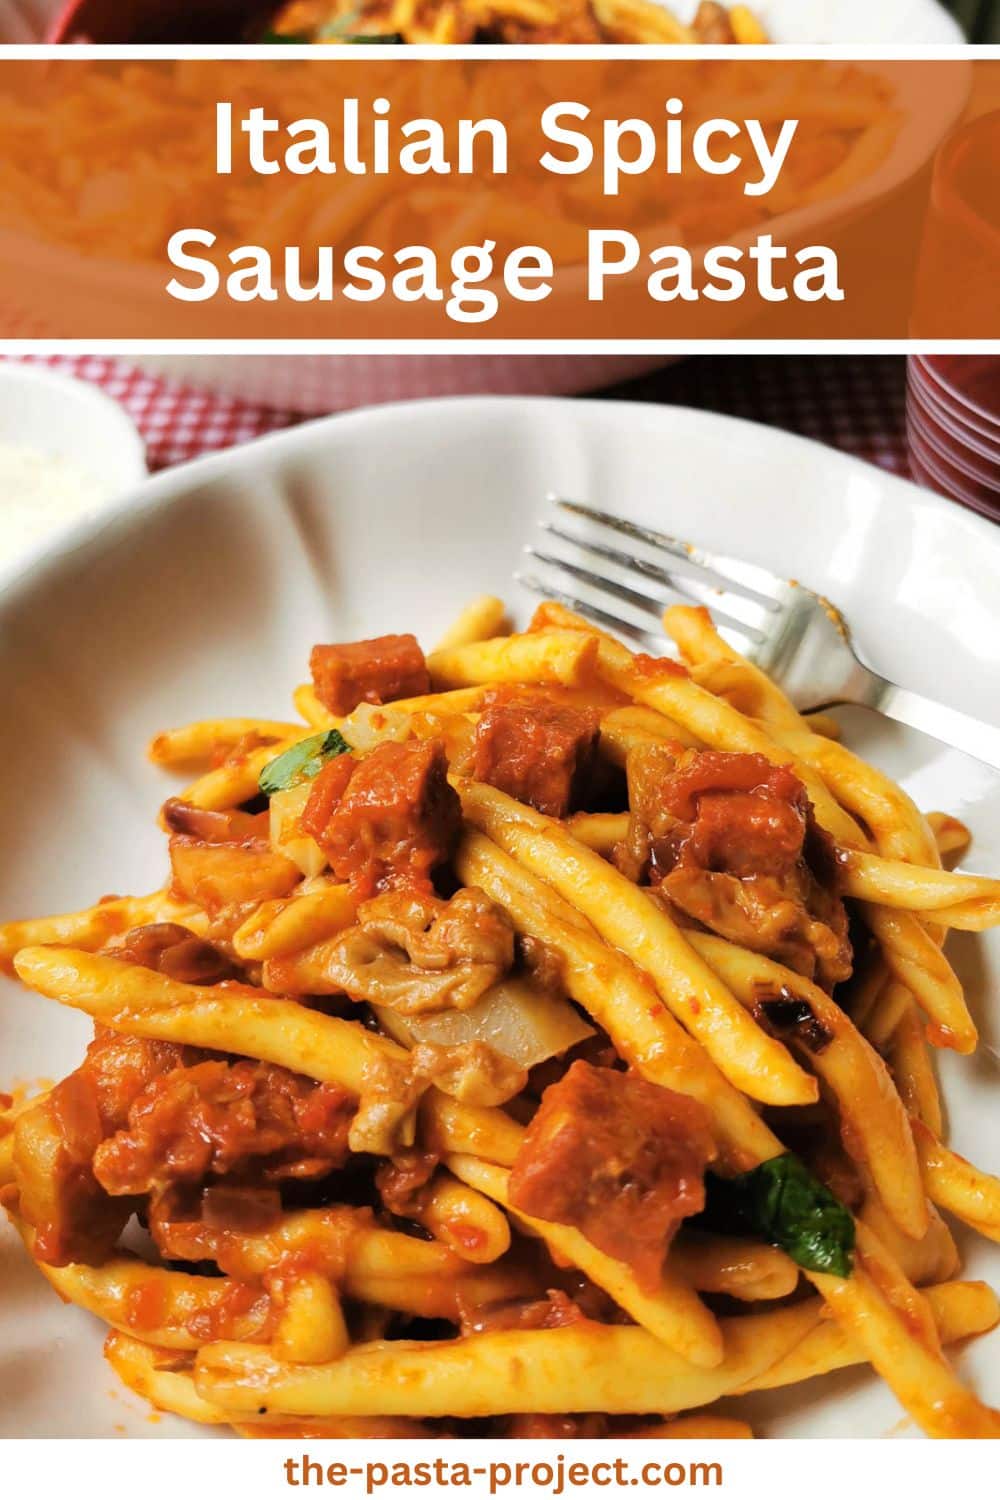 Spicy sausage pasta in a bowl.